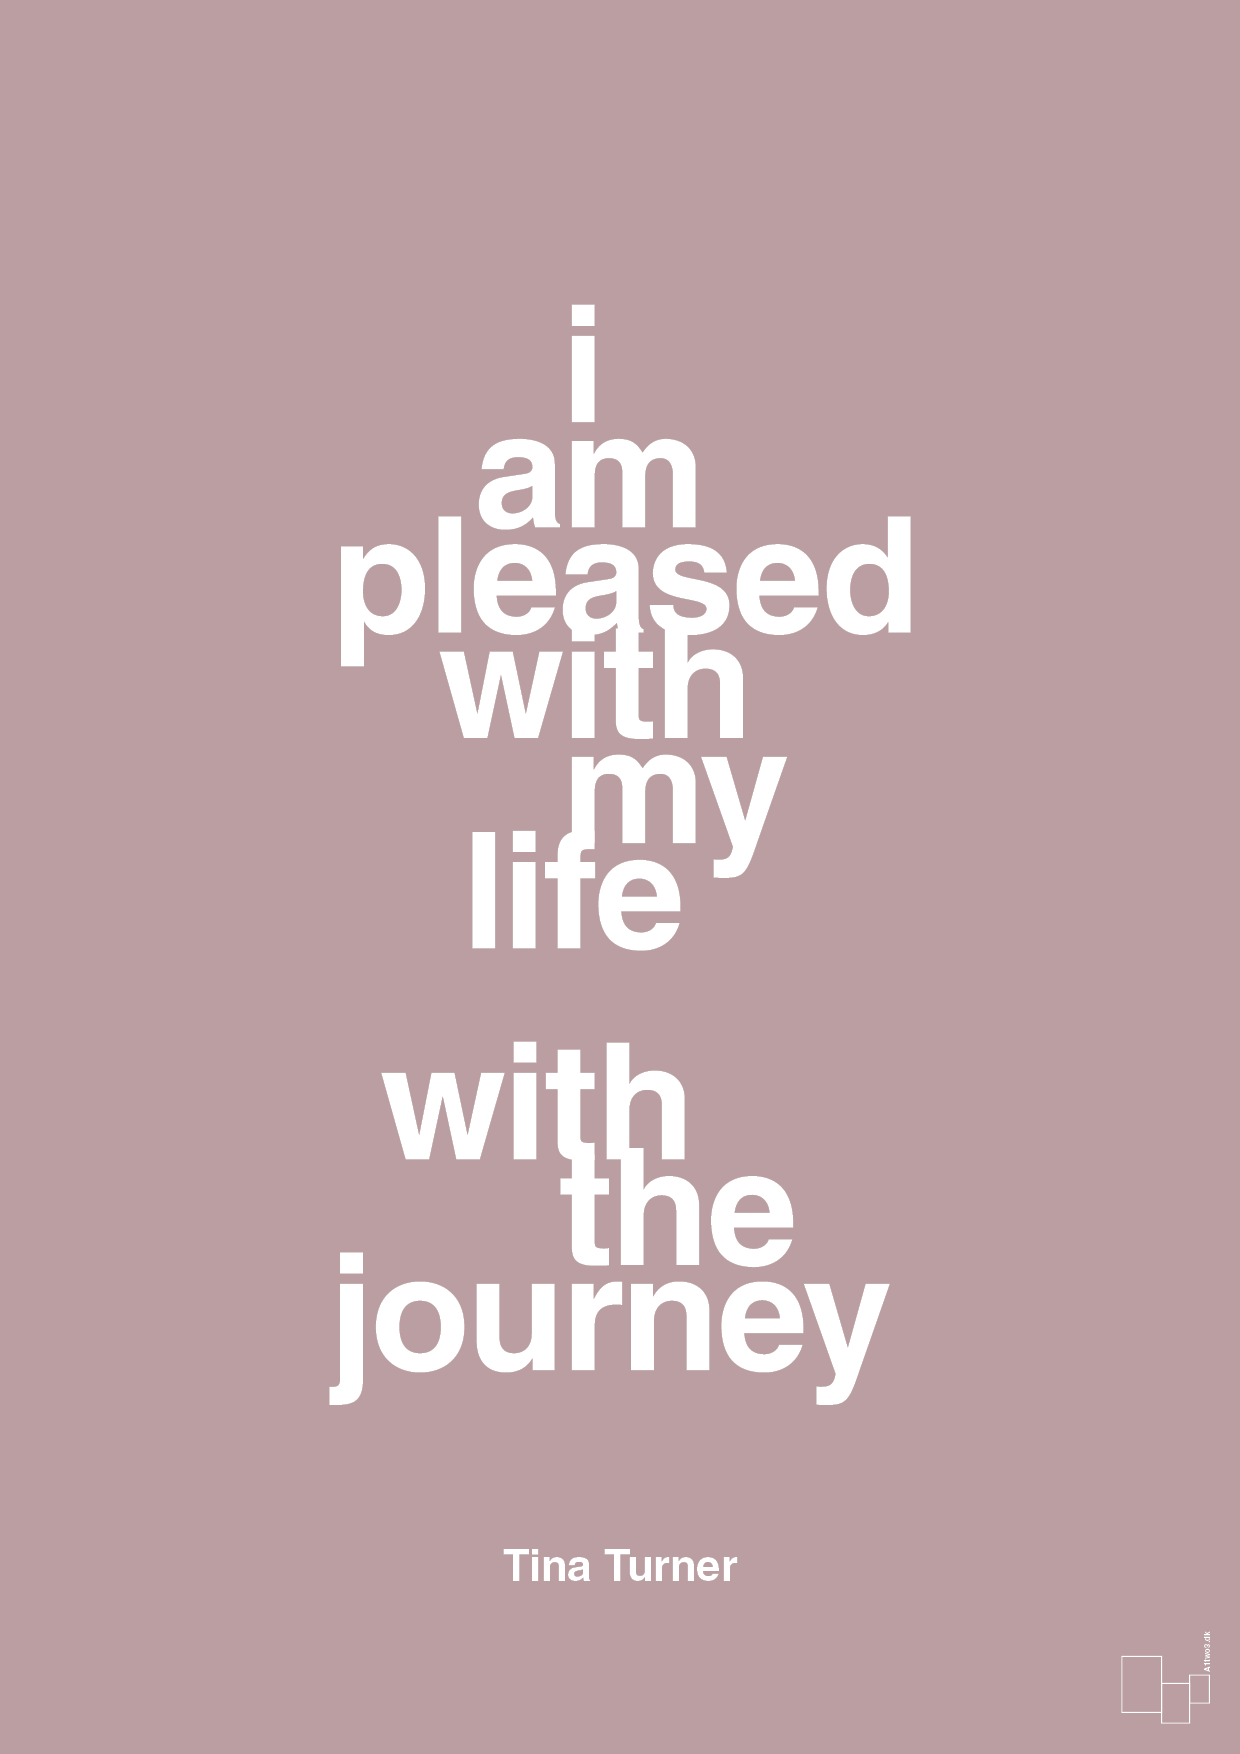 i am pleased with my life with the journey - Plakat med Citater i Light Rose